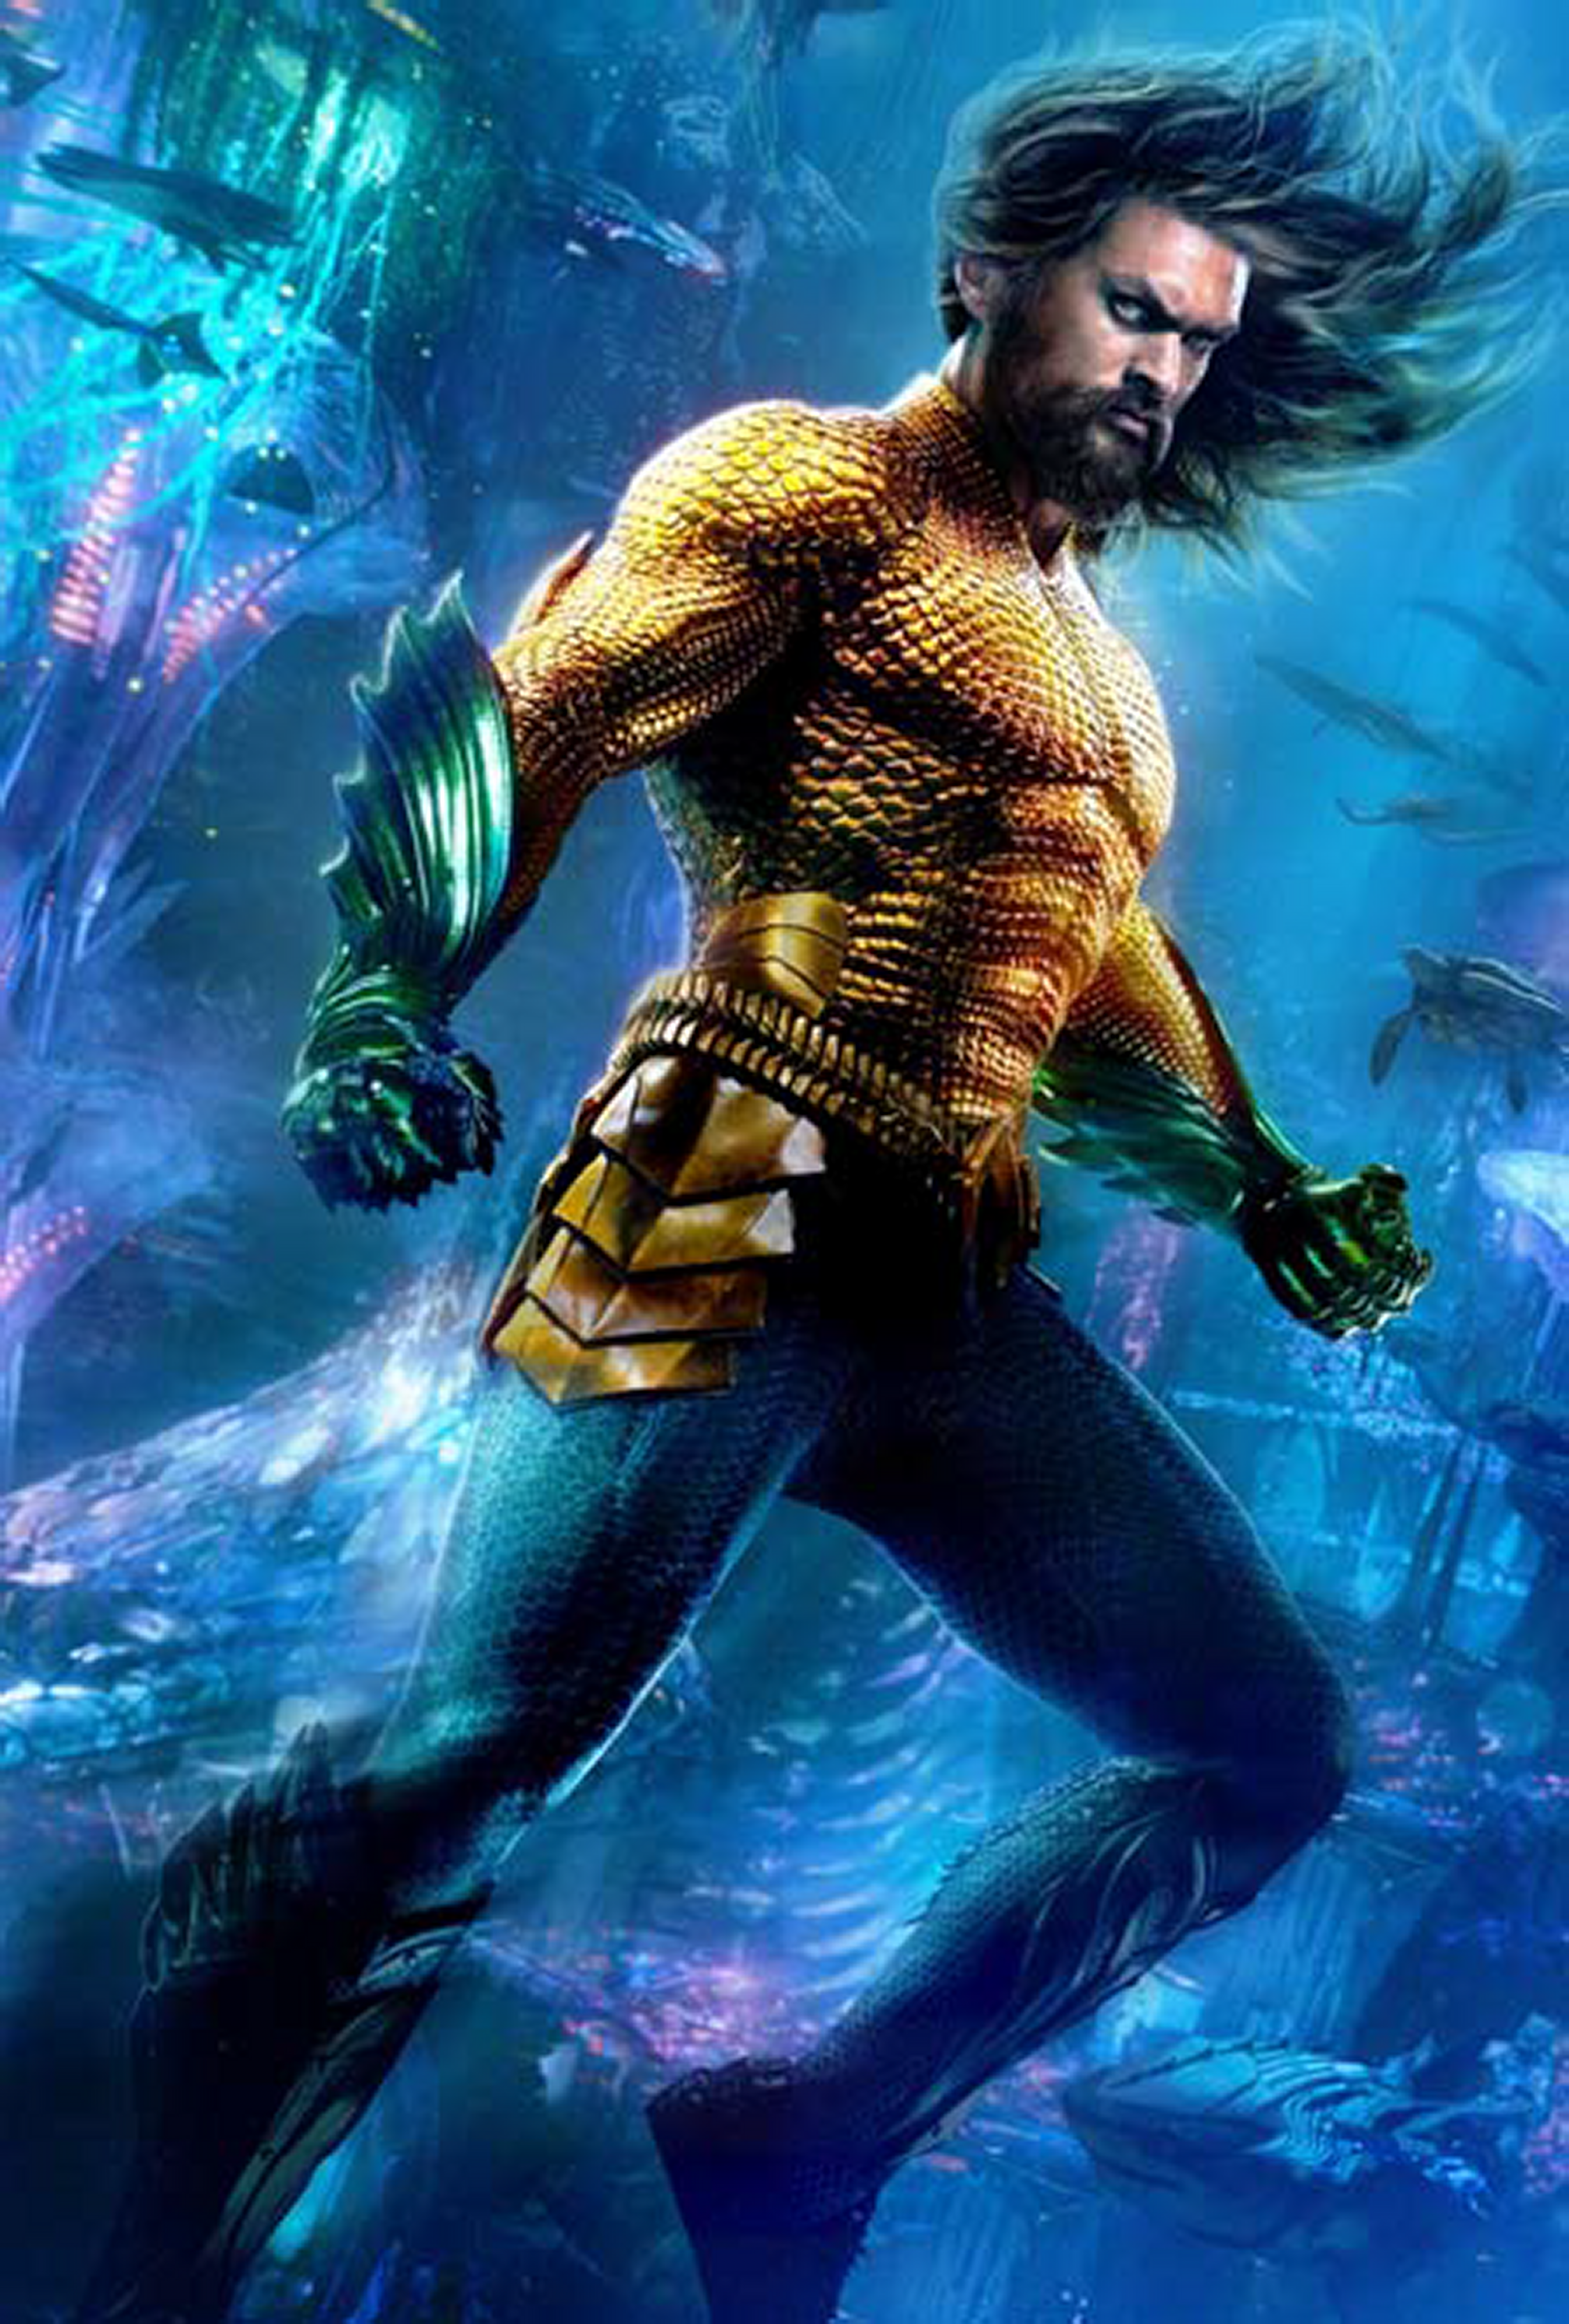 Details about   Batman Total Justice Aquaman Gold Armor Variation Free Ship w/ Pro Packing 